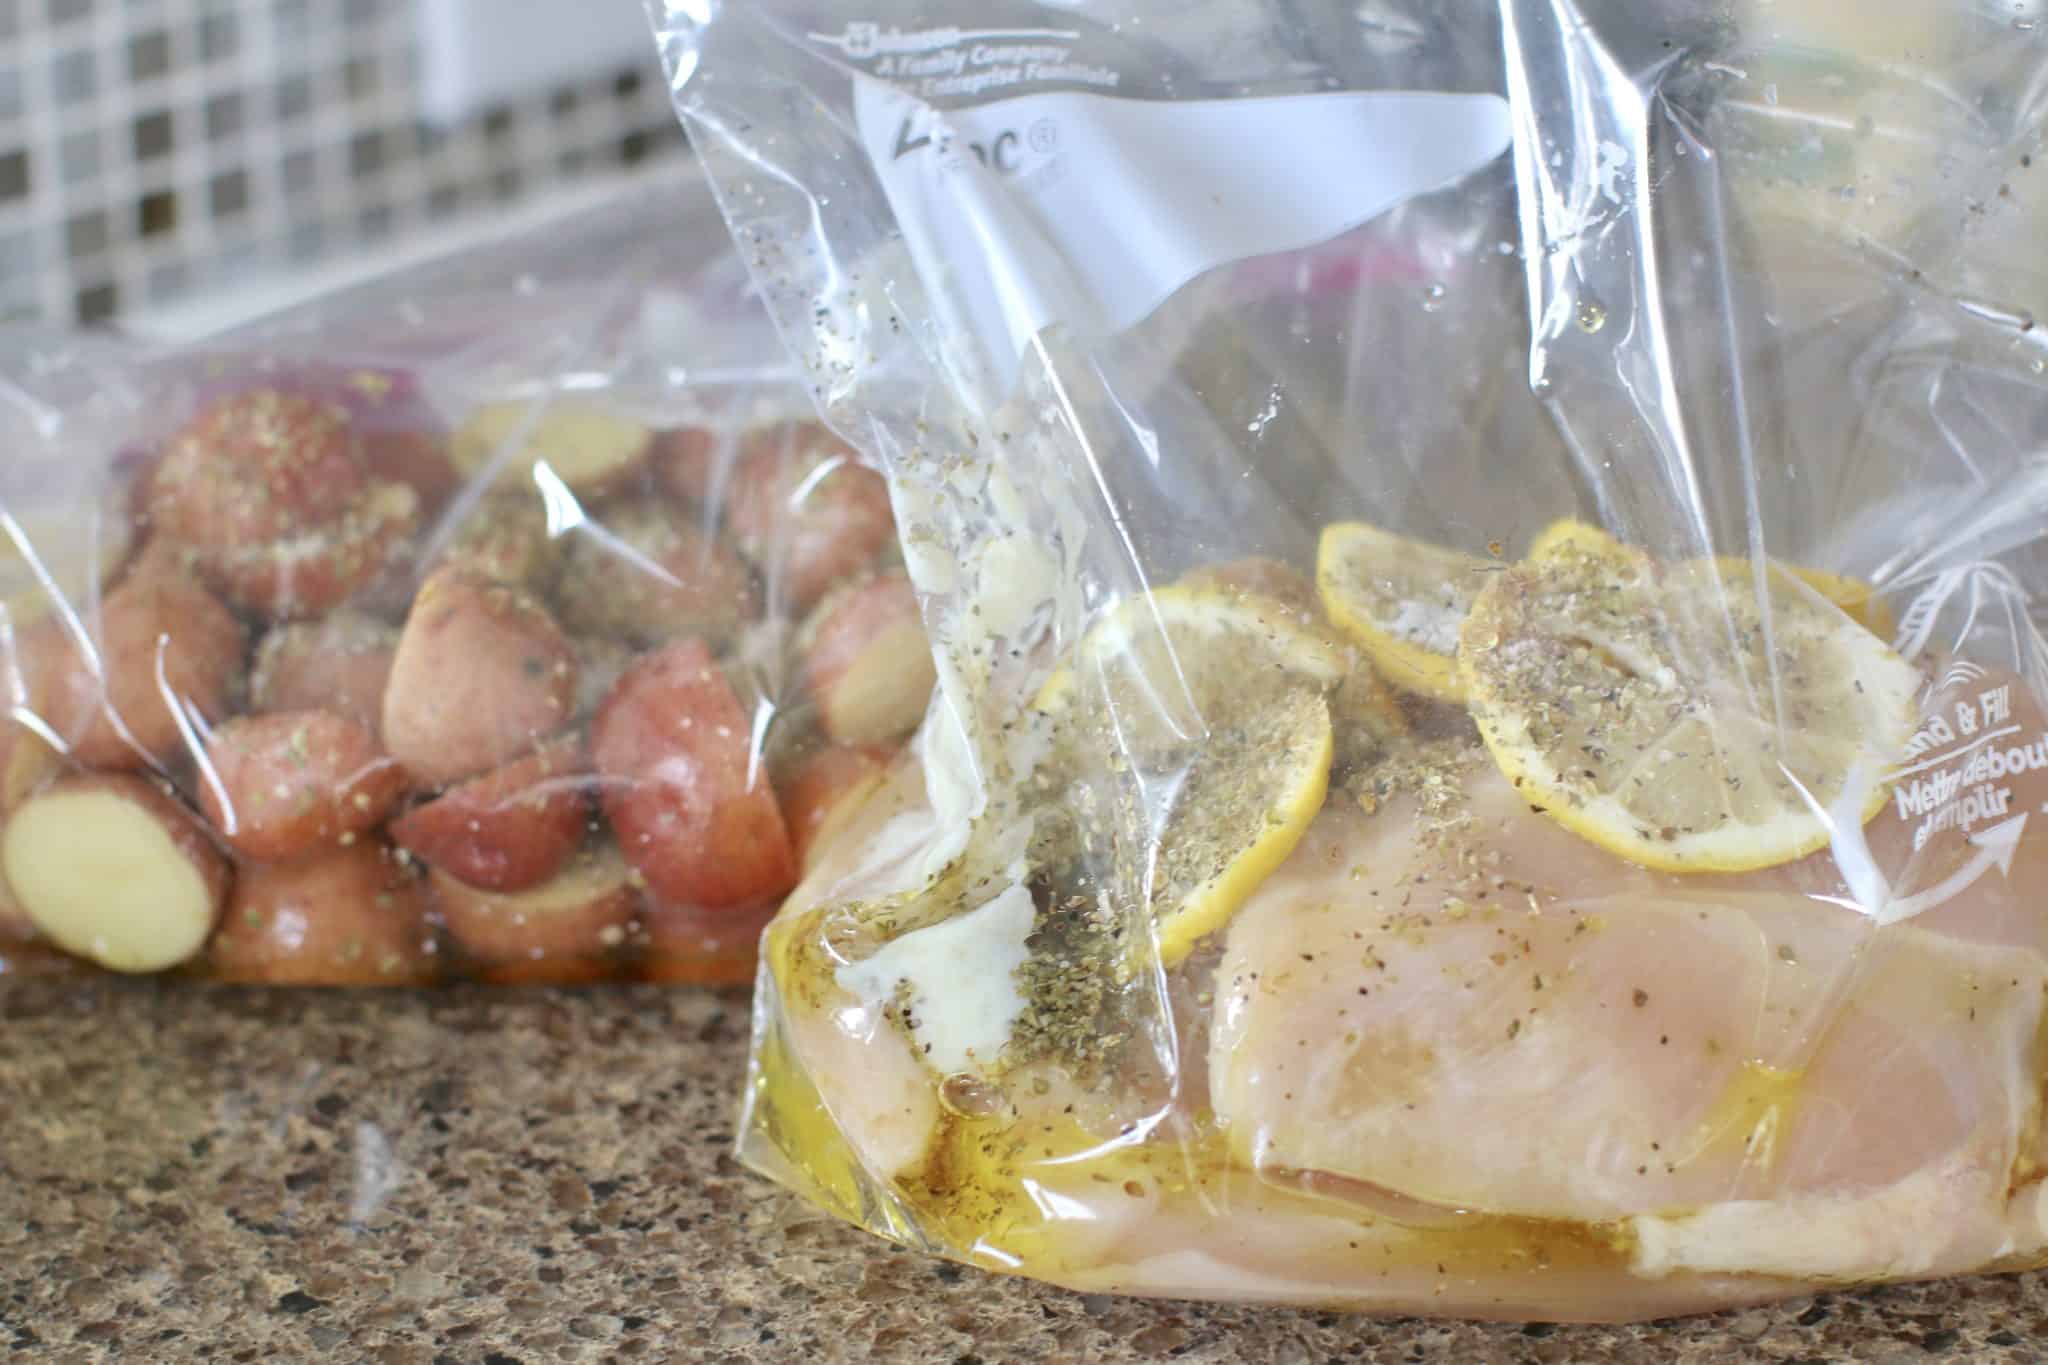 marinade added to both bags holding chicken breasts and sliced red potatoes.